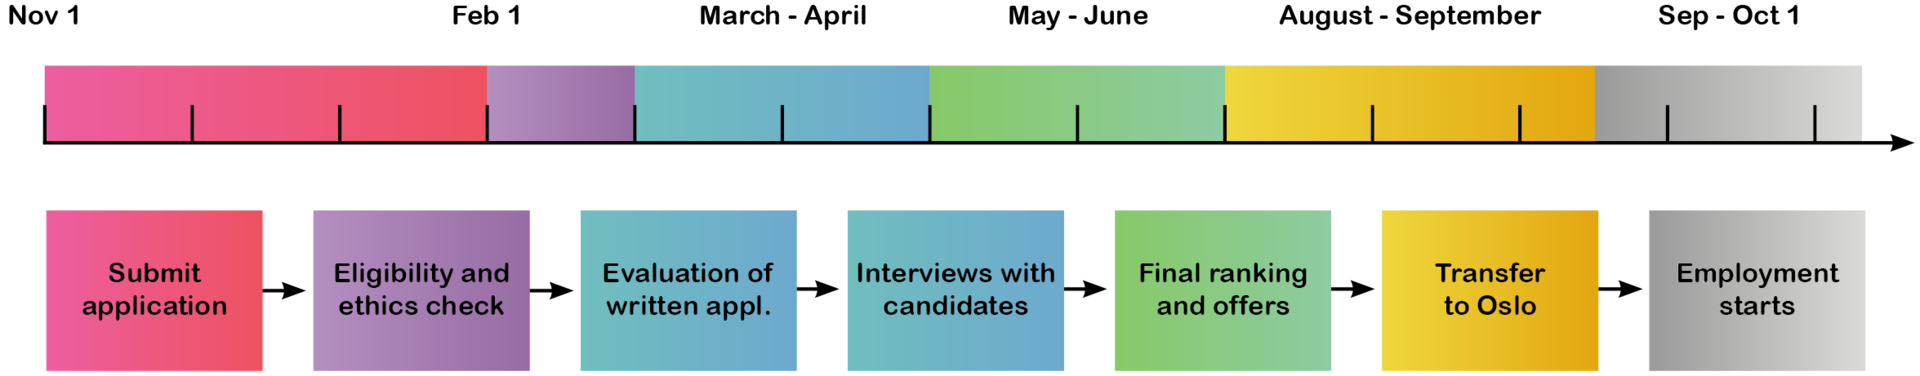 illustration of evaluation process and timeline